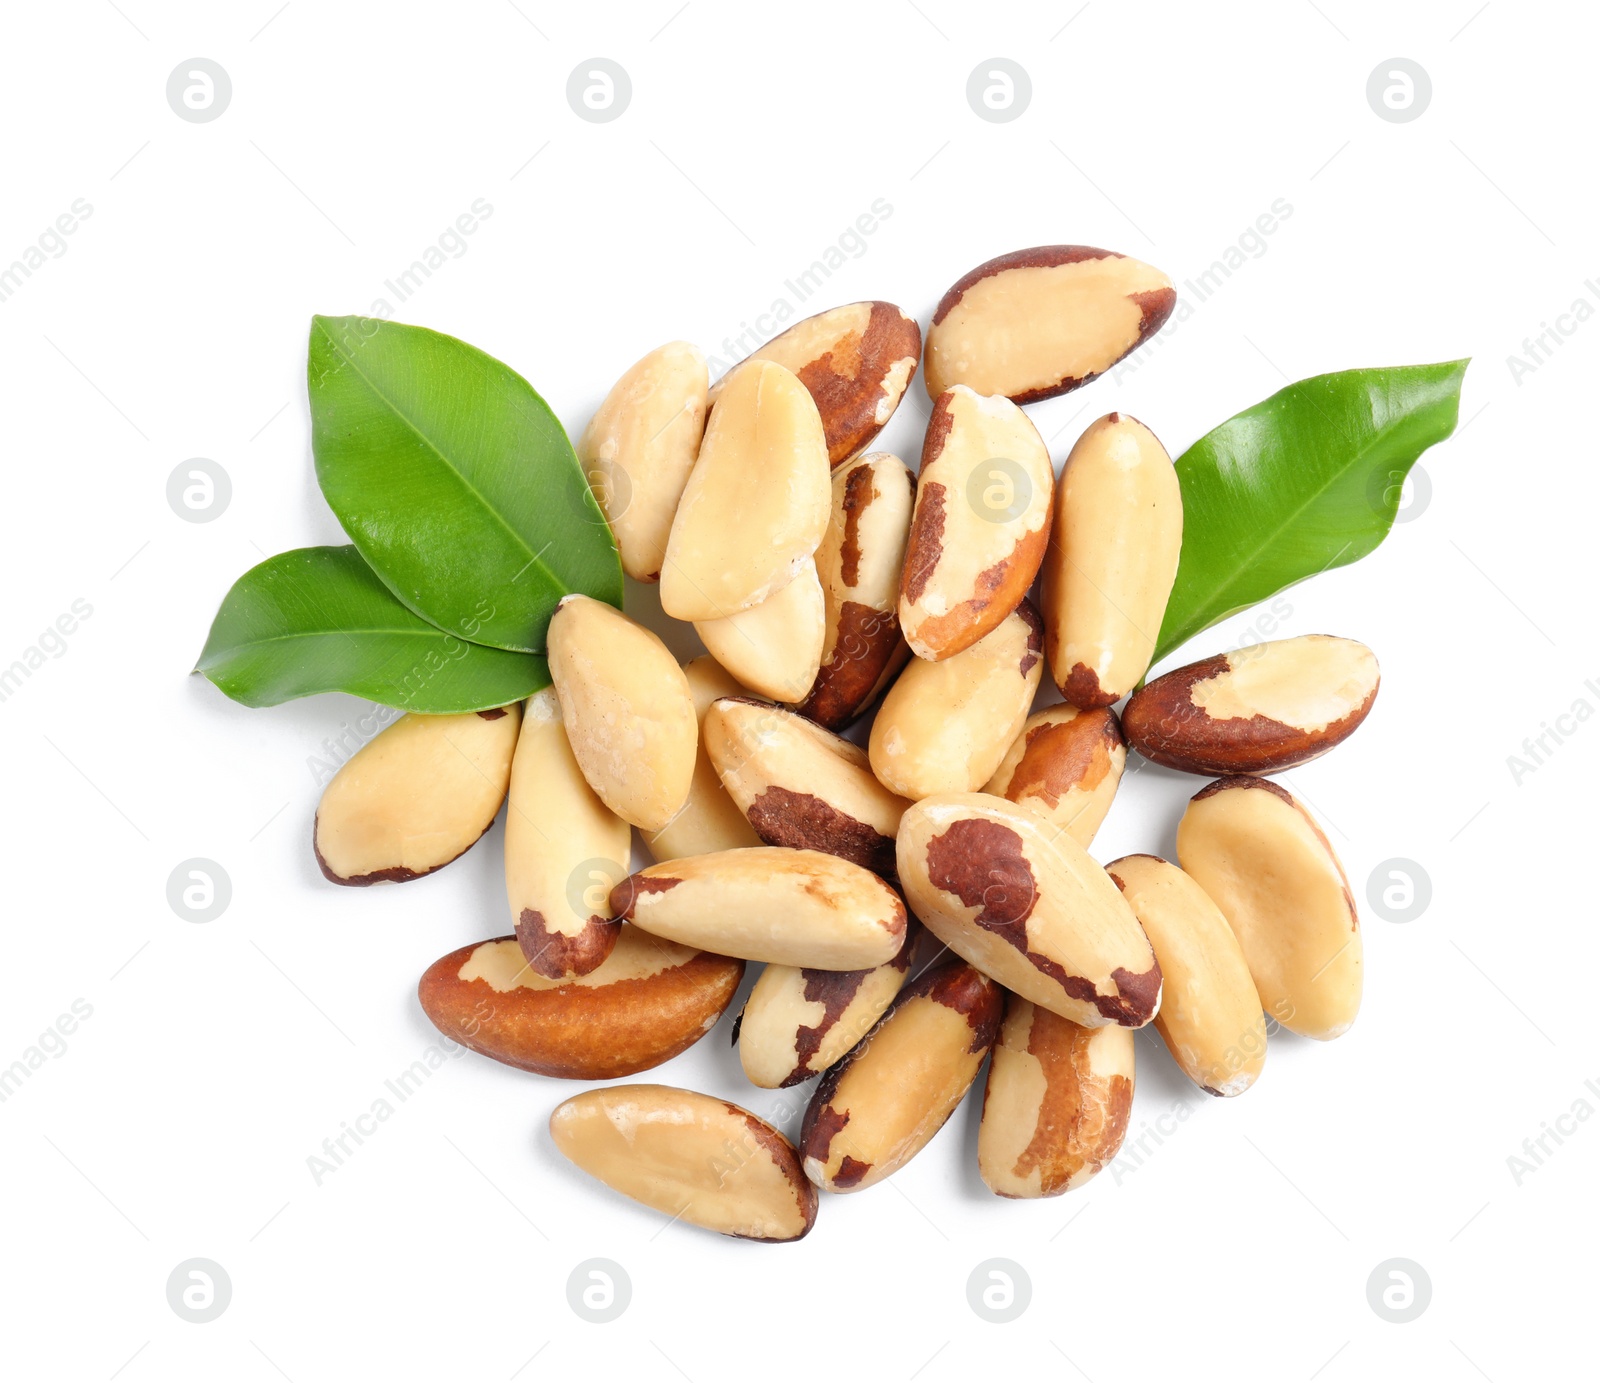 Photo of Brazil nuts with green leaves on white background, top view